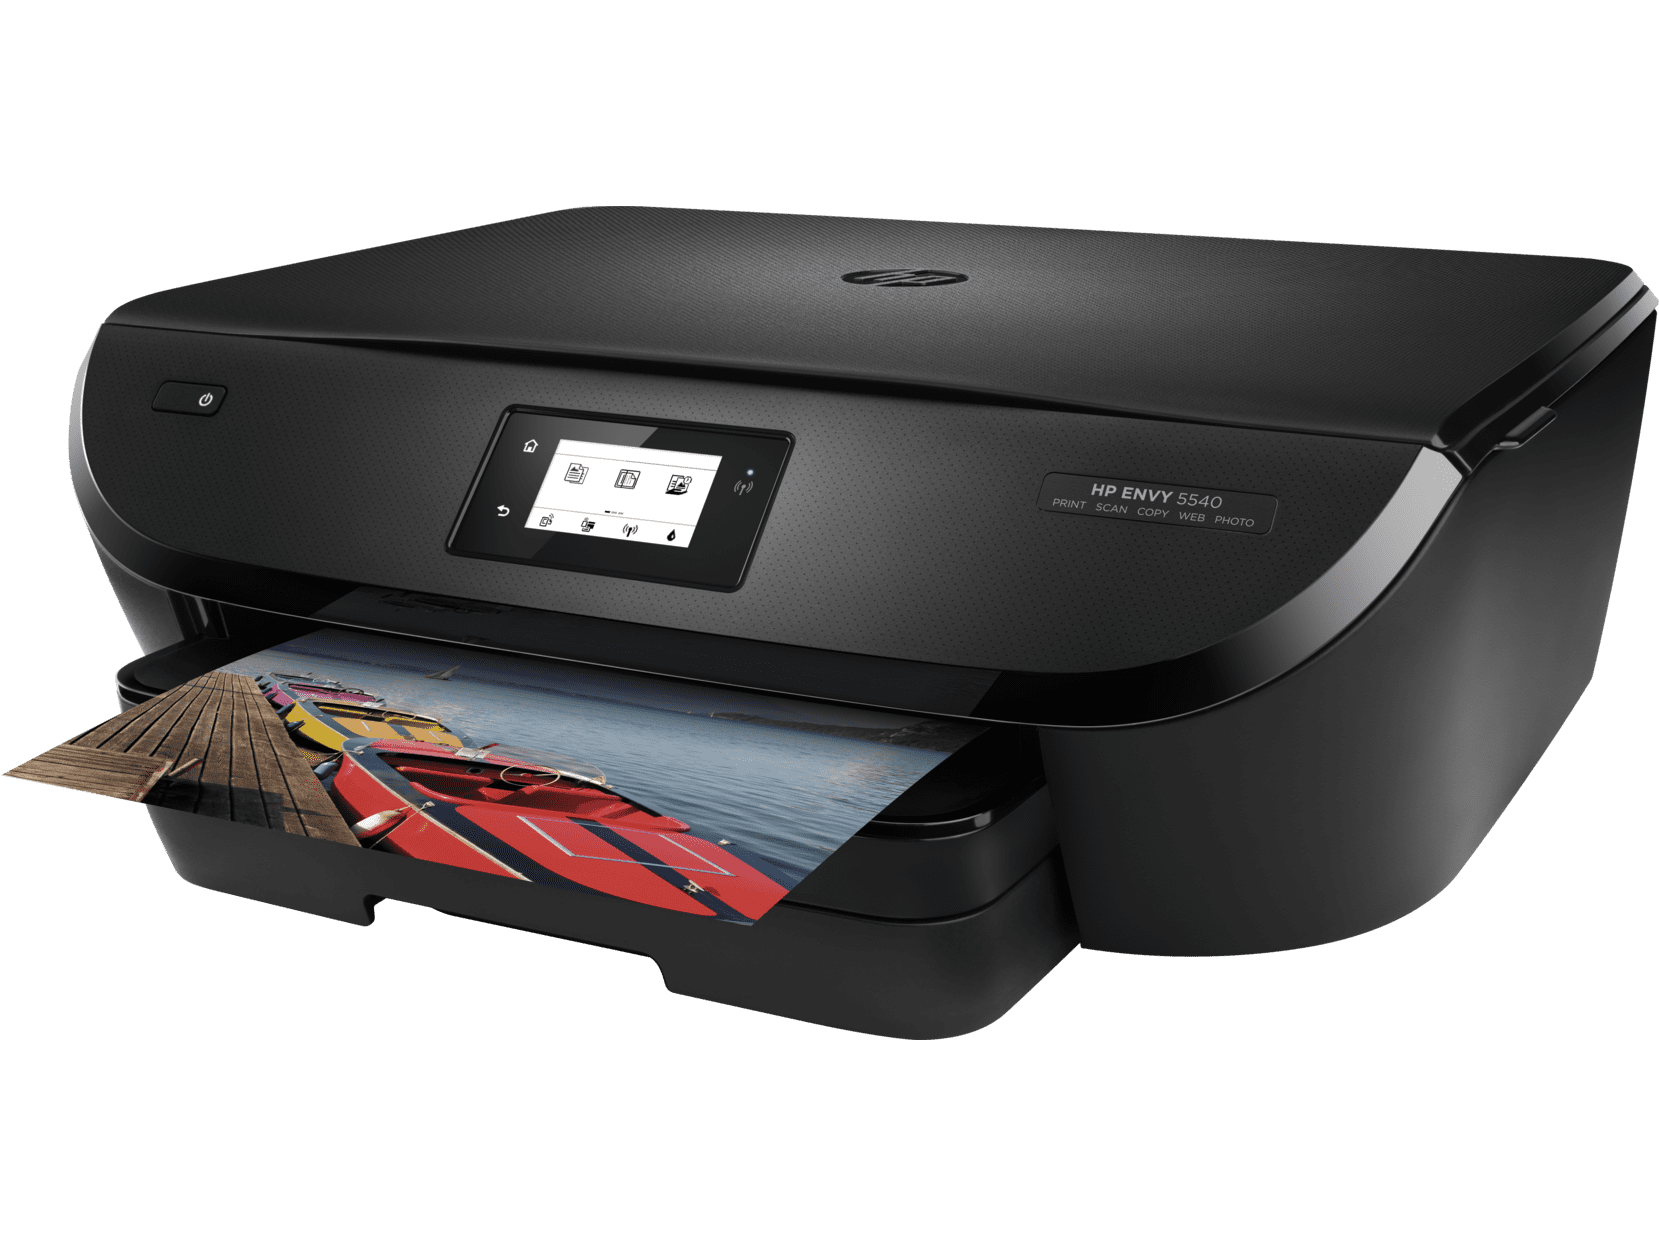 HP ENVY 5540 Wireless All-in-One Inkjet Photo Printer with Mobile Printing Renewed